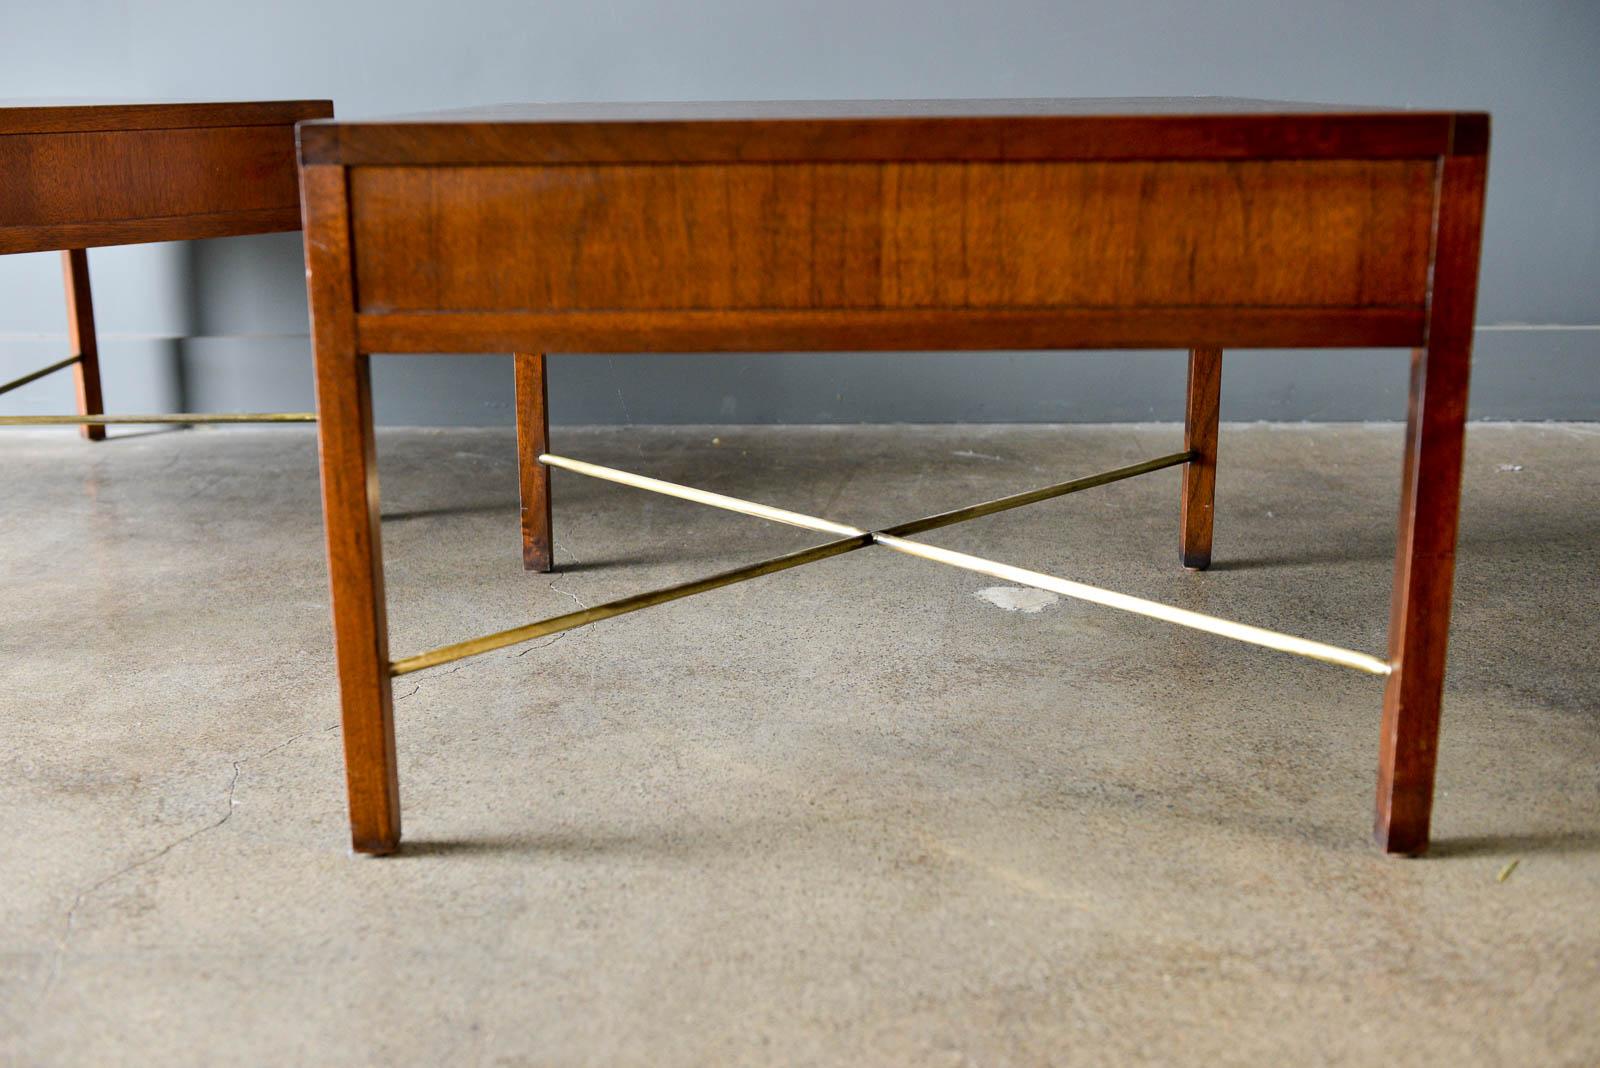 Pair of rosewood and brass X base side or end tables, circa 1965. Beautiful rosewood grain with brass X base stretcher bars in good vintage condition. Finished on all sides, these tables can float in the middle of a room. Unmarked, in the style of